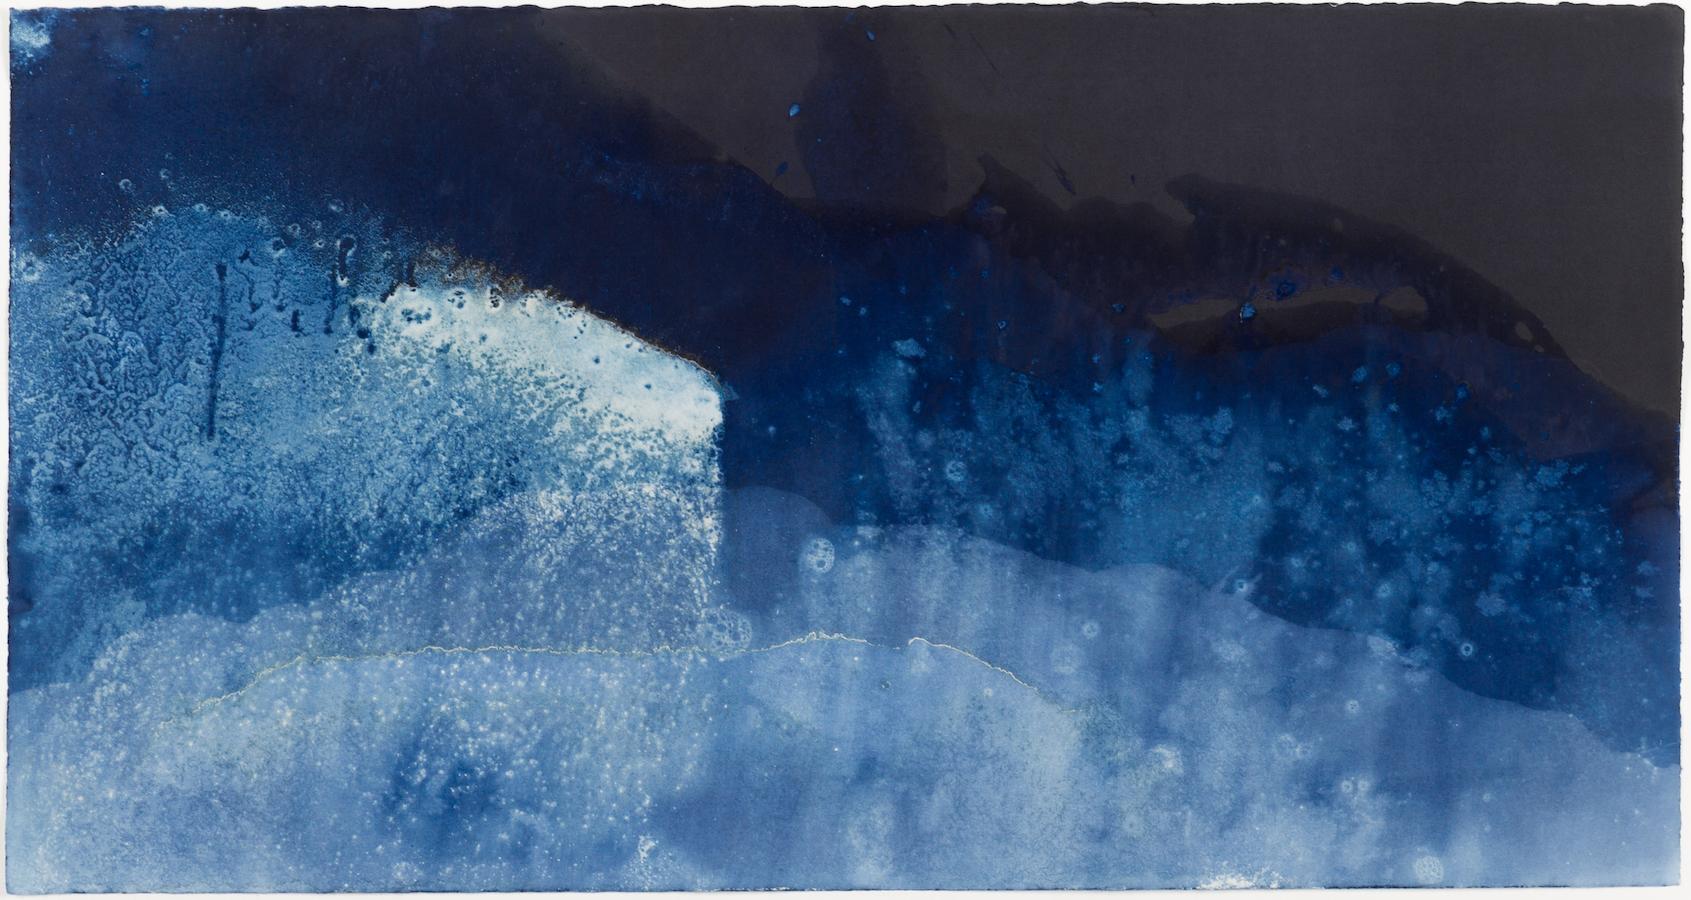 28° 50' 27.1314"N, 111° 58'3.4674" W-13. Cyanotype photograph of the ocean waves - Photograph by Paola Davila